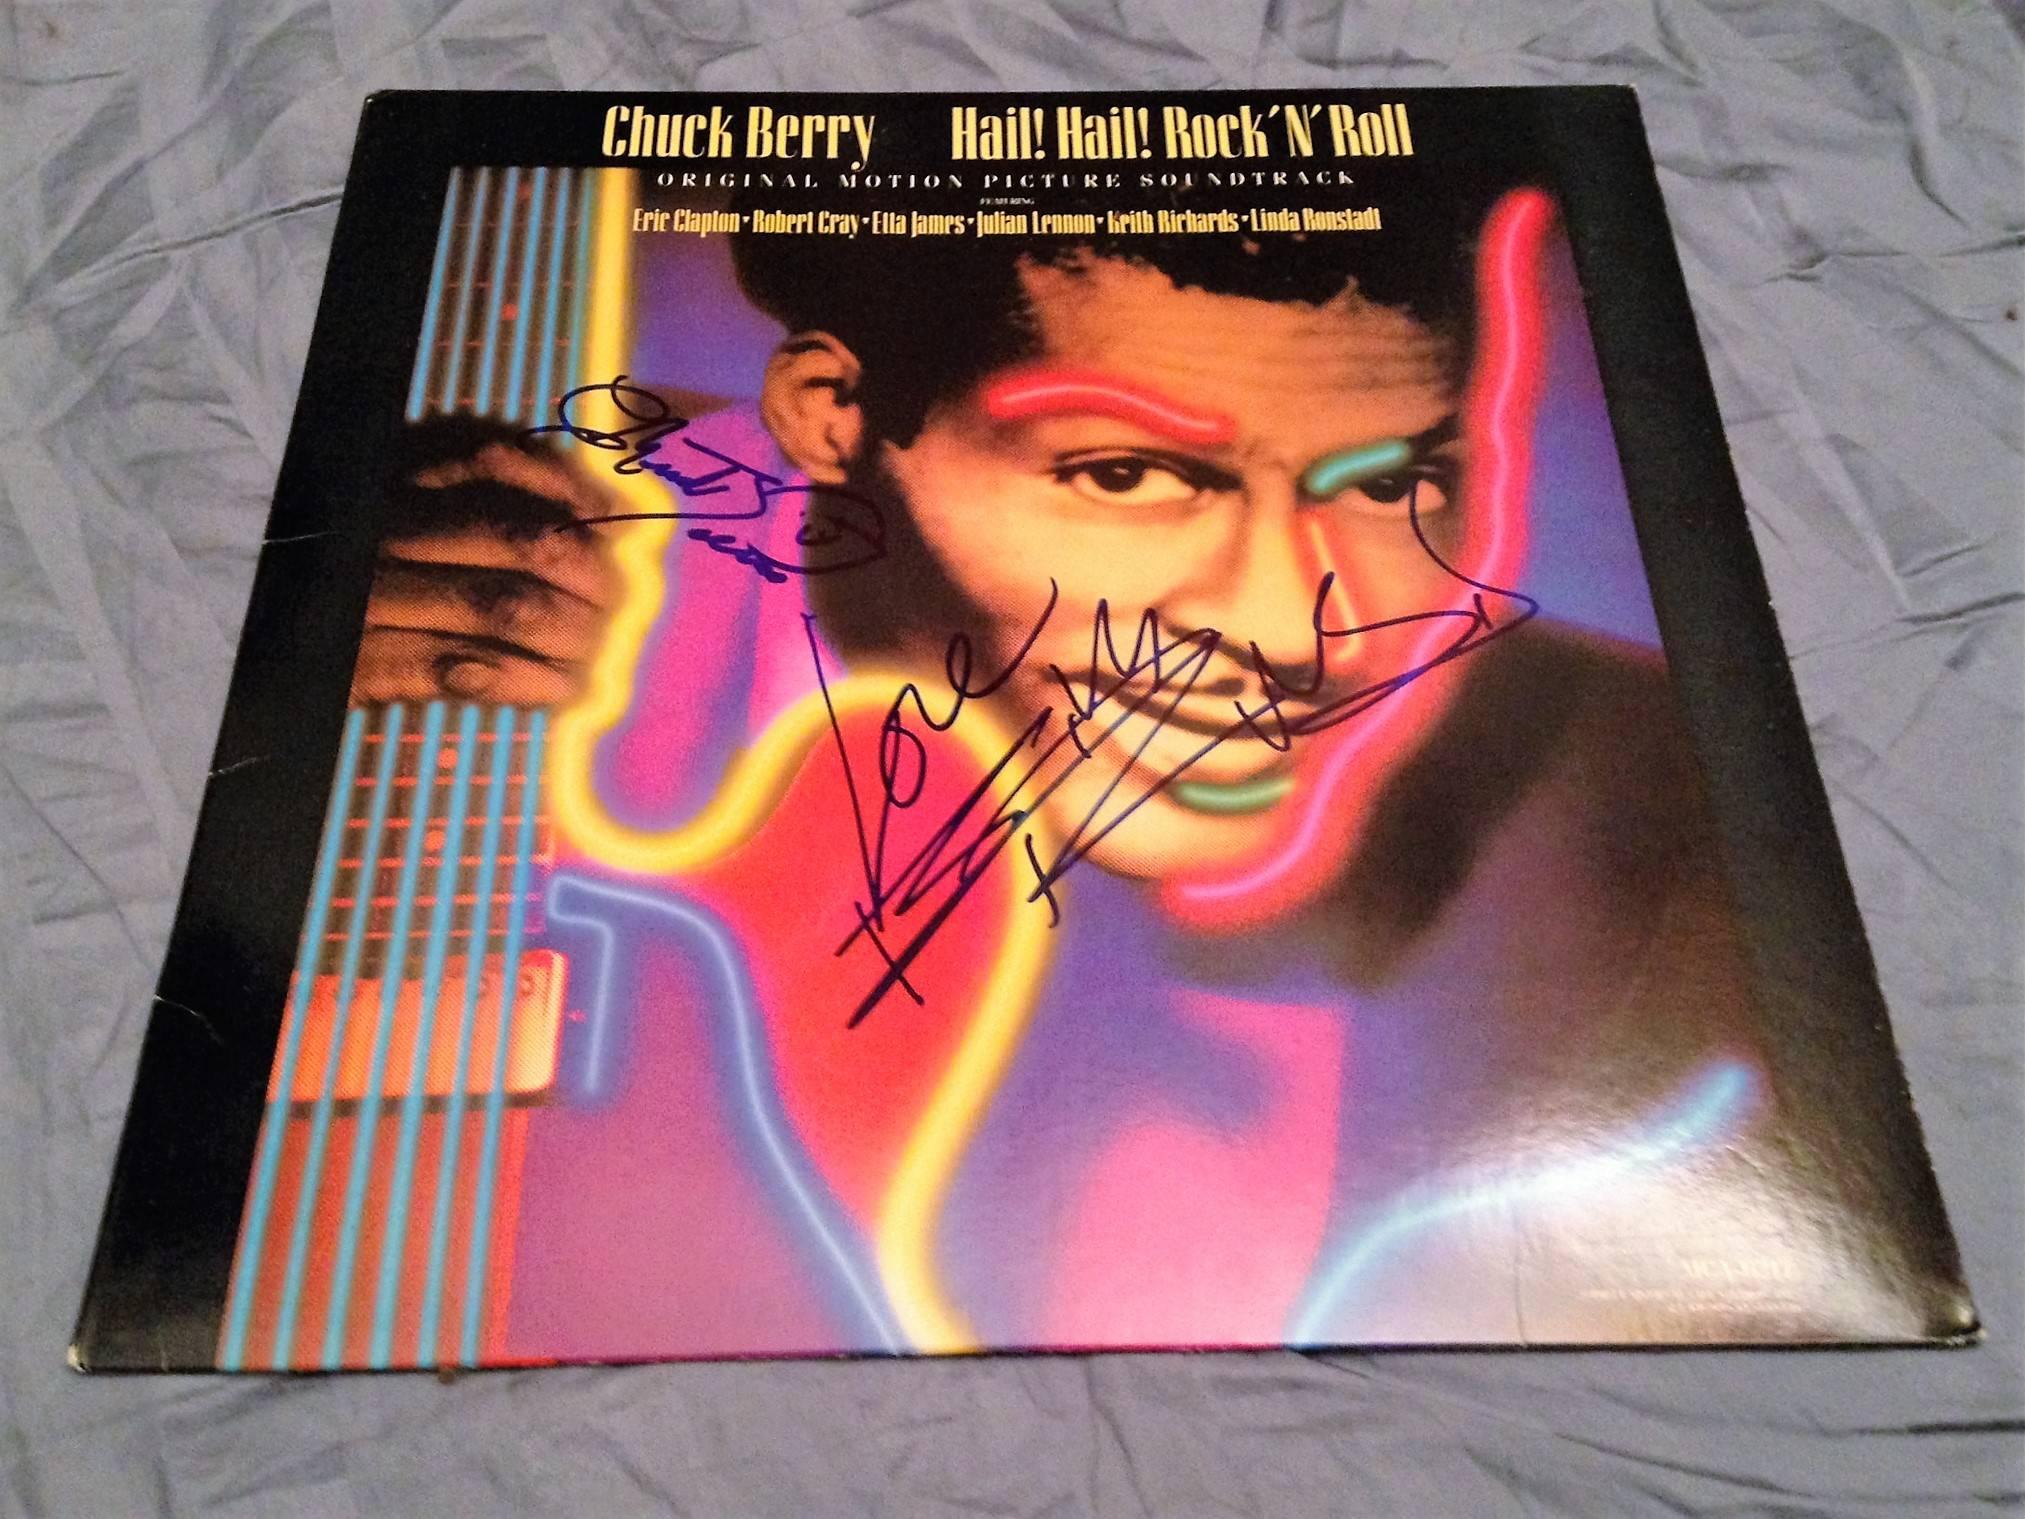 Hail Hail Rock and Roll the album that features the songs of Chuck Berry released in October 16, 1987 that includes all of Chuck Berry's hit songs: Maybellene, Roll Over Beethoven, Rock And Roll Music and many others. This album was produced by